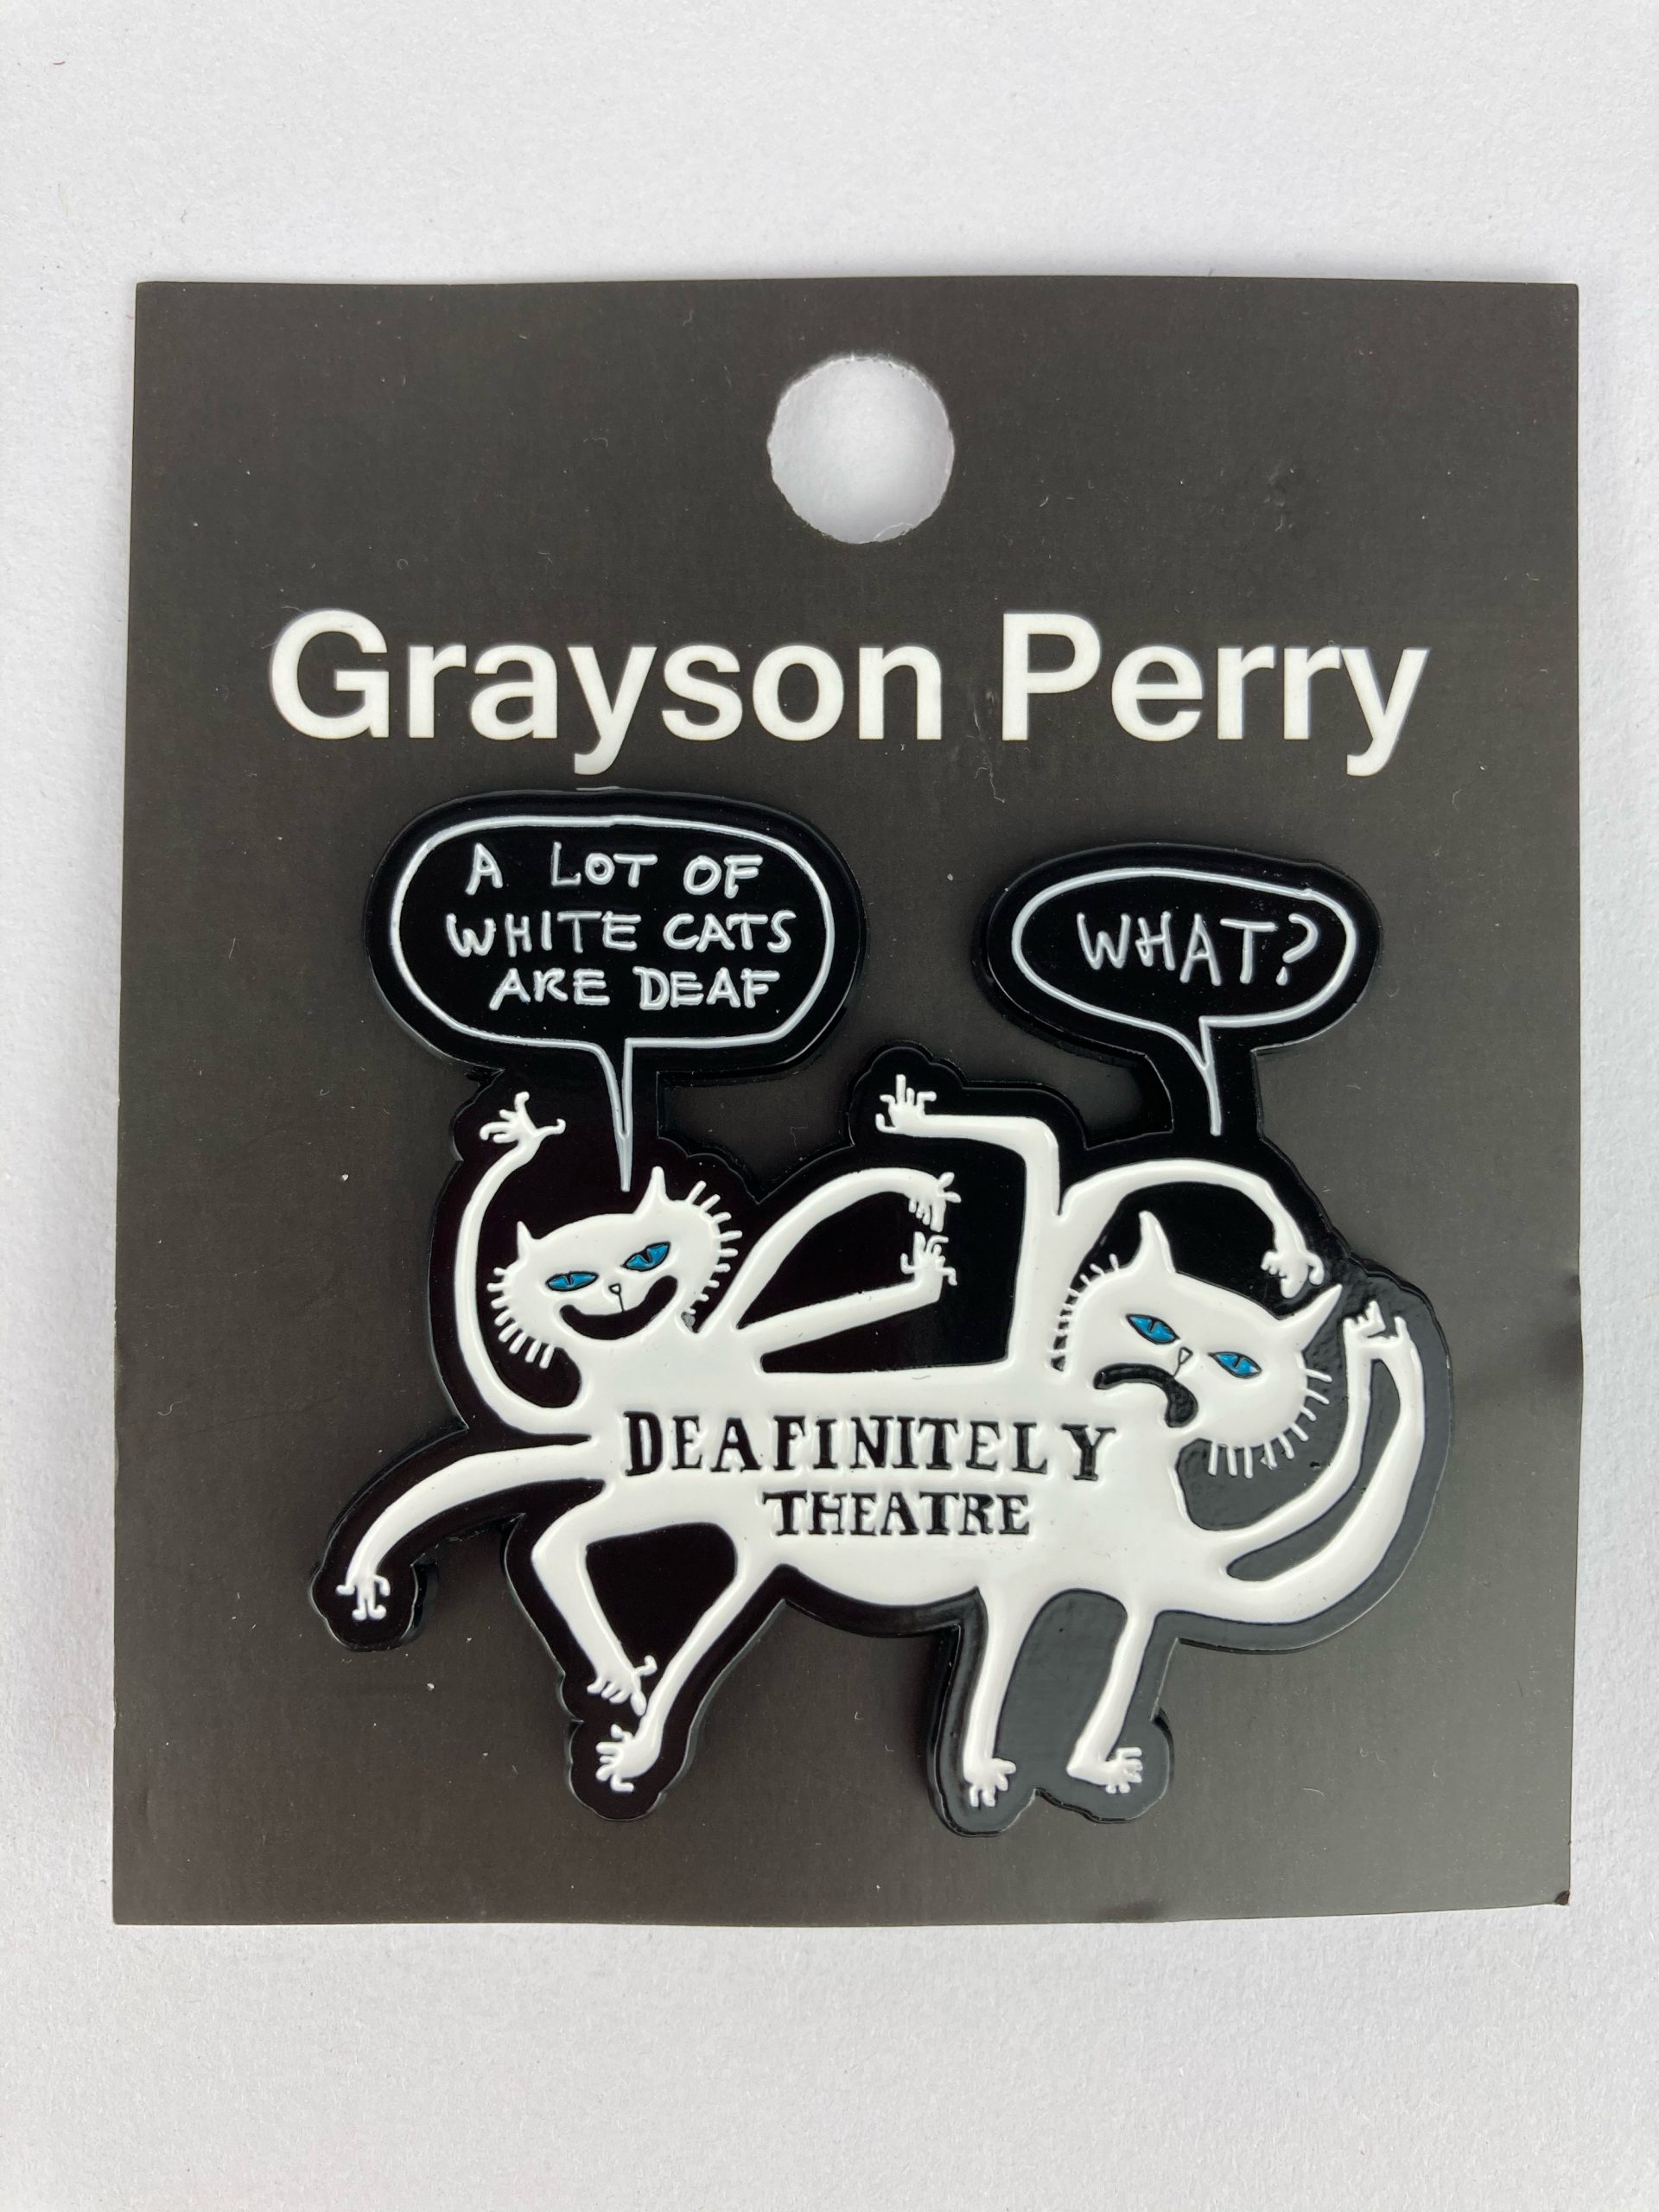 grayson-perry-badge